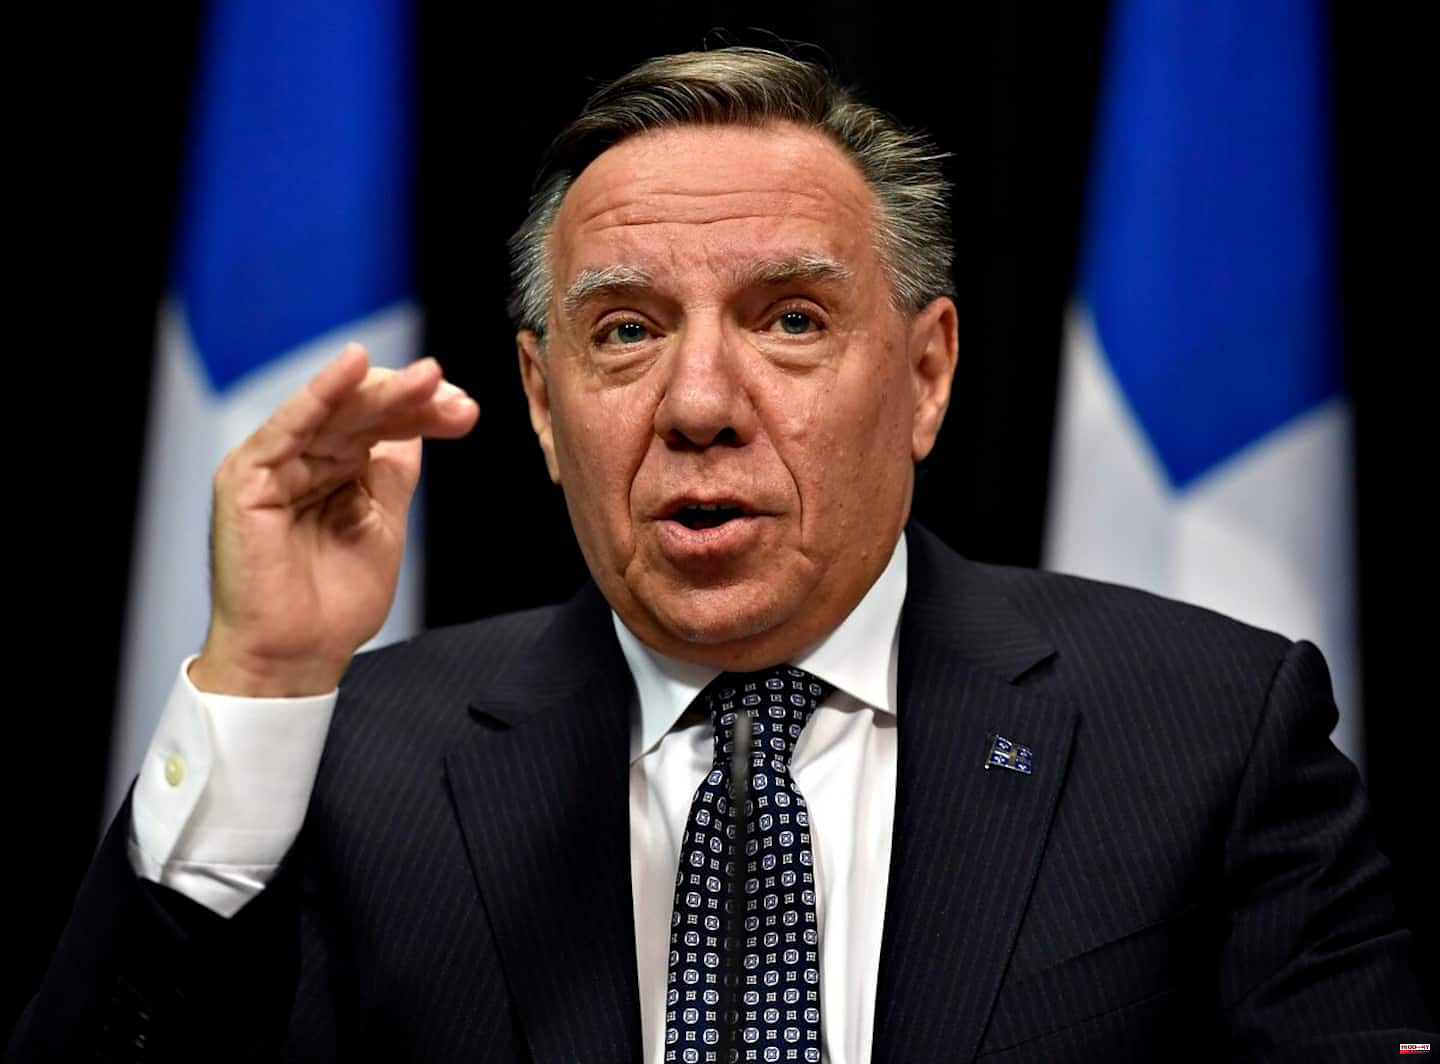 It's time to get angry, Mr. Legault!